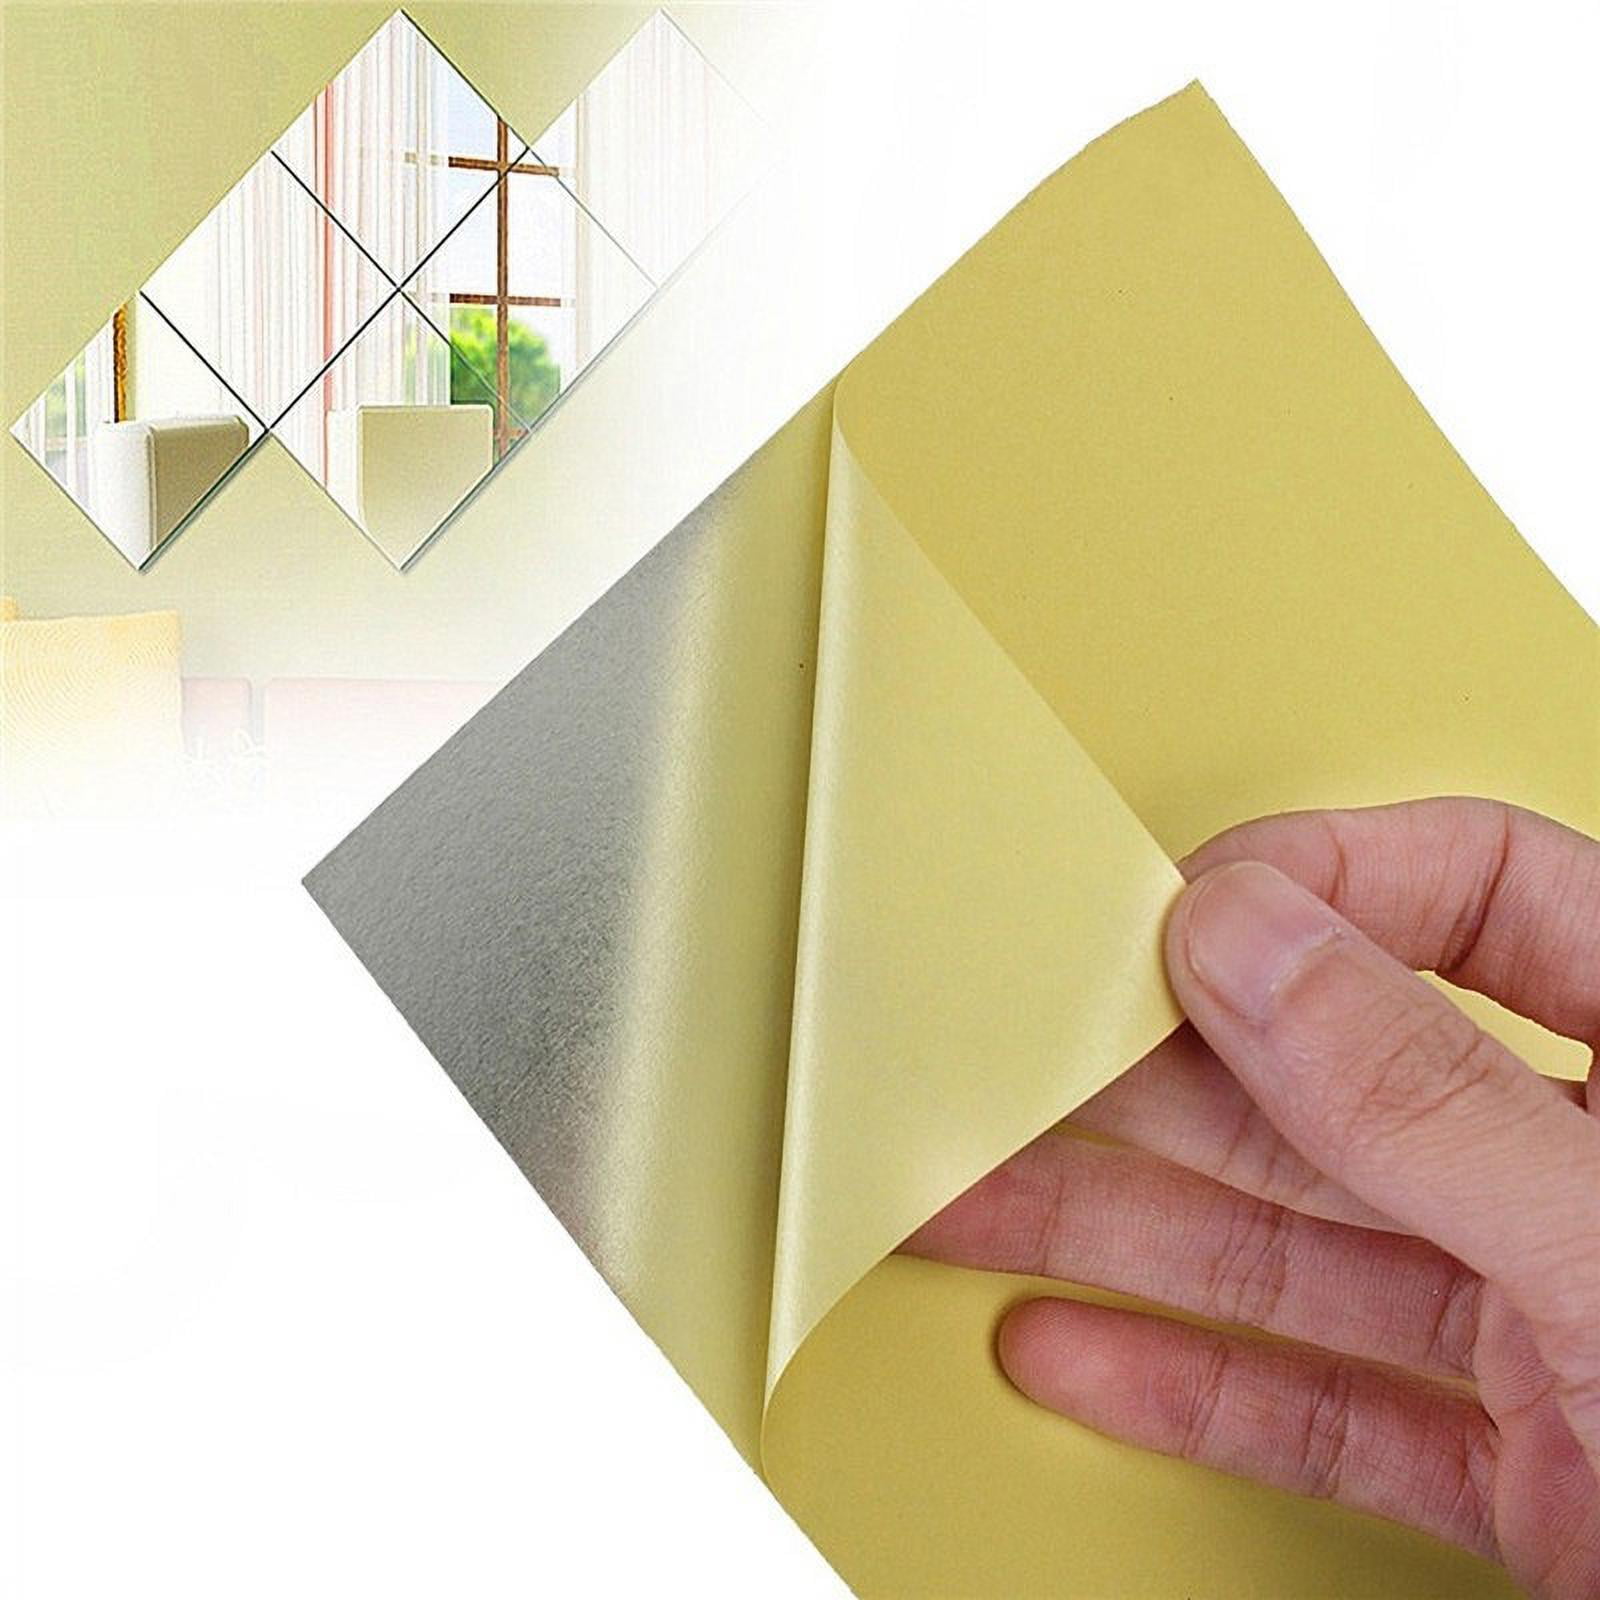 12pcs Flexible Mirror Sheets Self Adhesive, EEEkit Non-Glass Tiles Stickers  DIY Mirror for Home Wall Decor (6x6in, 9x6in)